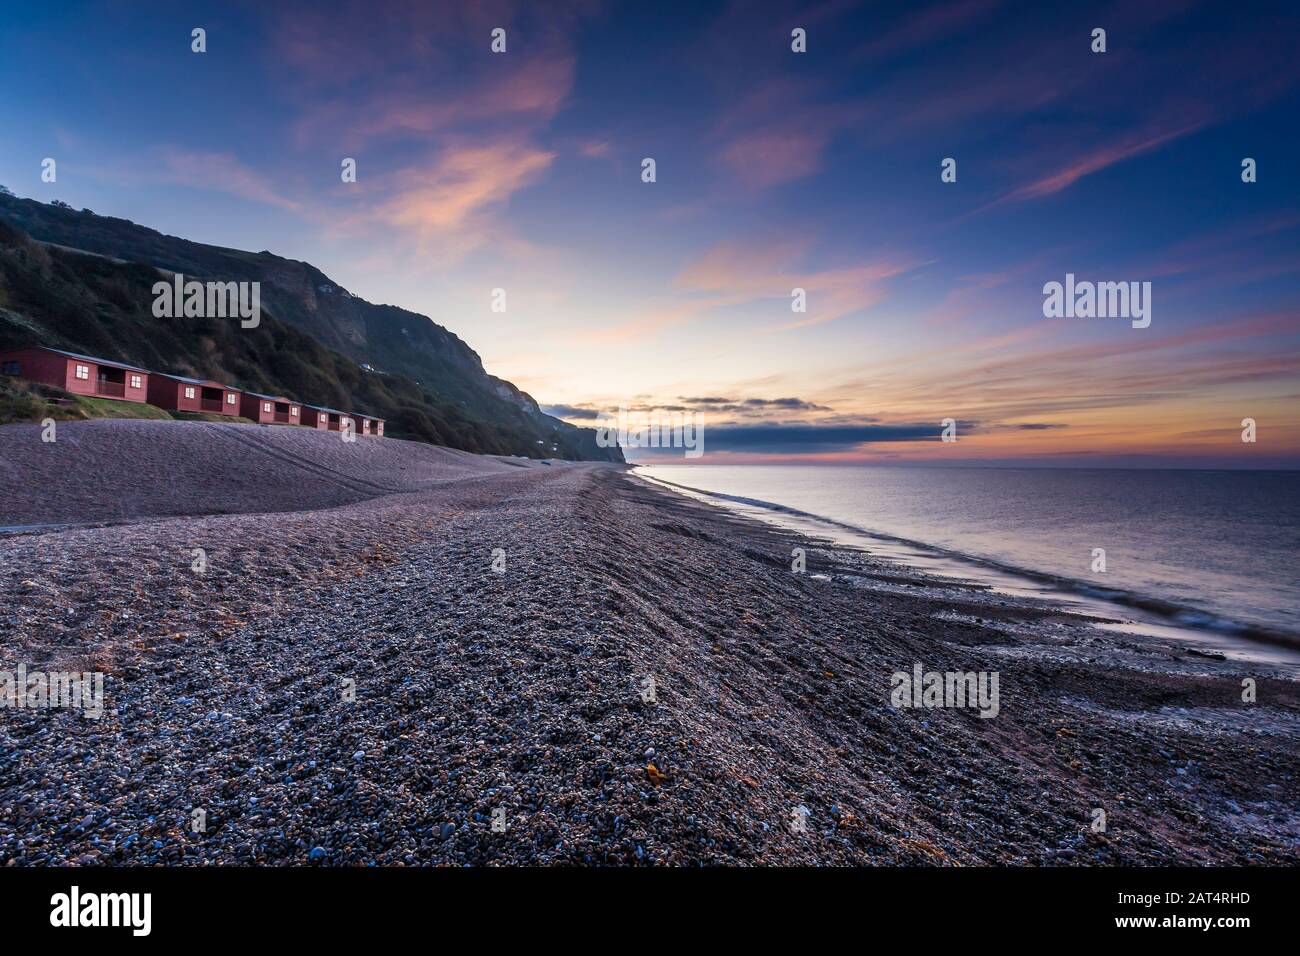 Just west of Beer is the small village of Branscombe seen here just before sunrise. Stock Photo